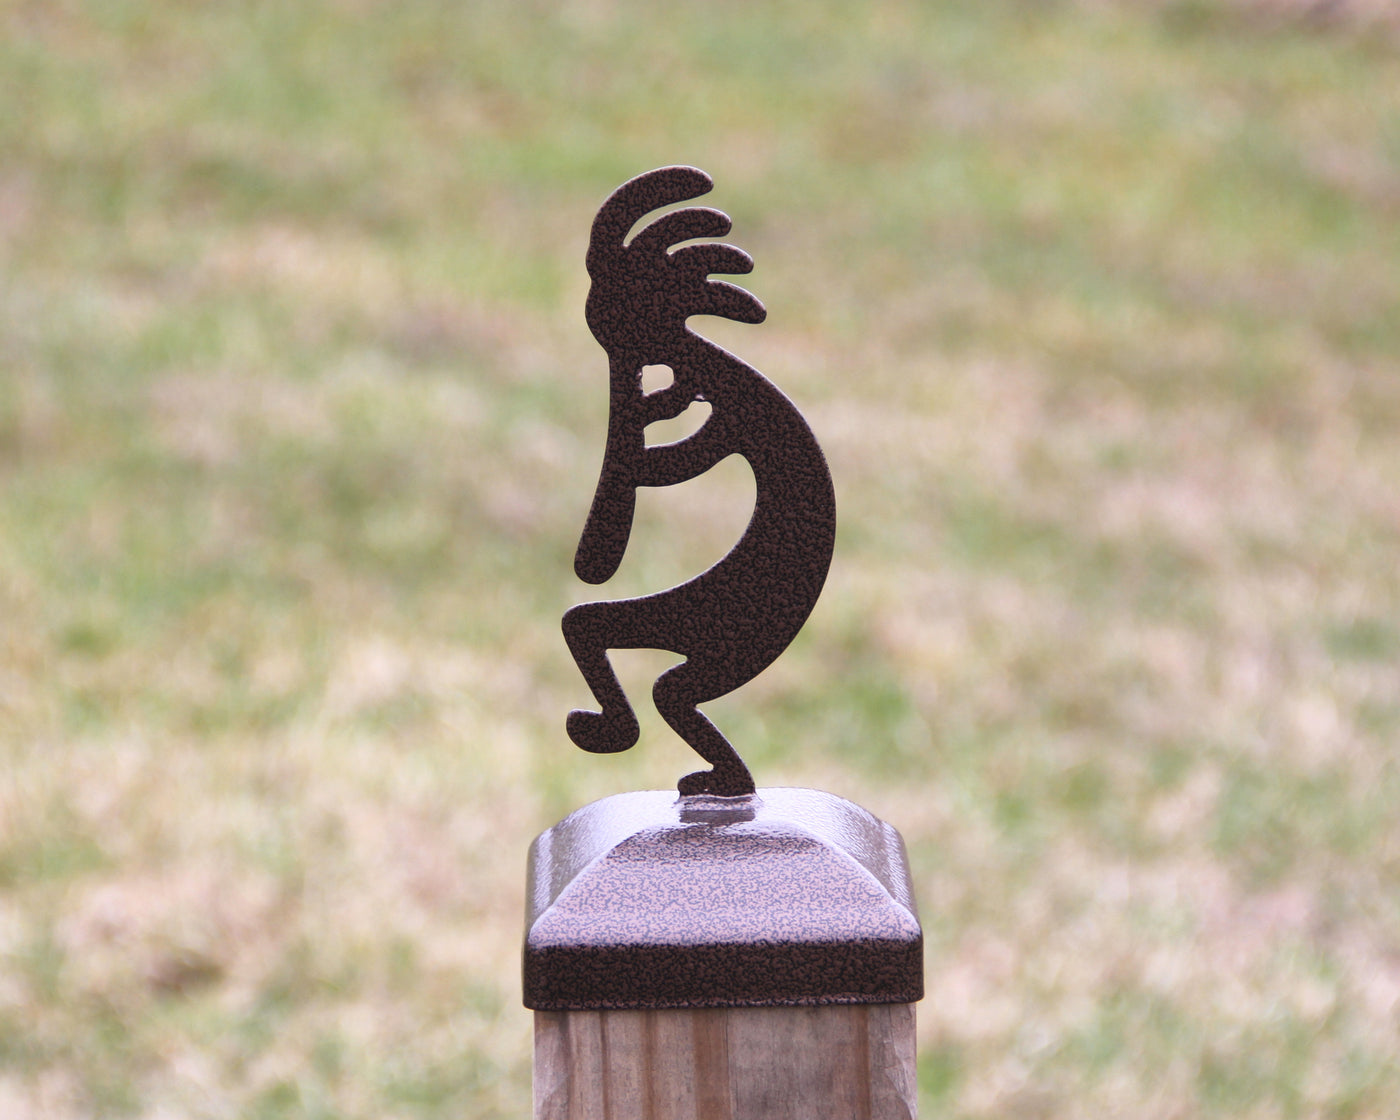 4X4 Kokopelli Post Cap - Madison Iron and Wood - Post Cap - metal outdoor decor - Steel deocrations - american made products - veteran owned business products - fencing decorations - fencing supplies - custom wall decorations - personalized wall signs - steel - decorative post caps - steel post caps - metal post caps - brackets - structural brackets - home improvement - easter - easter decorations - easter gift - easter yard decor